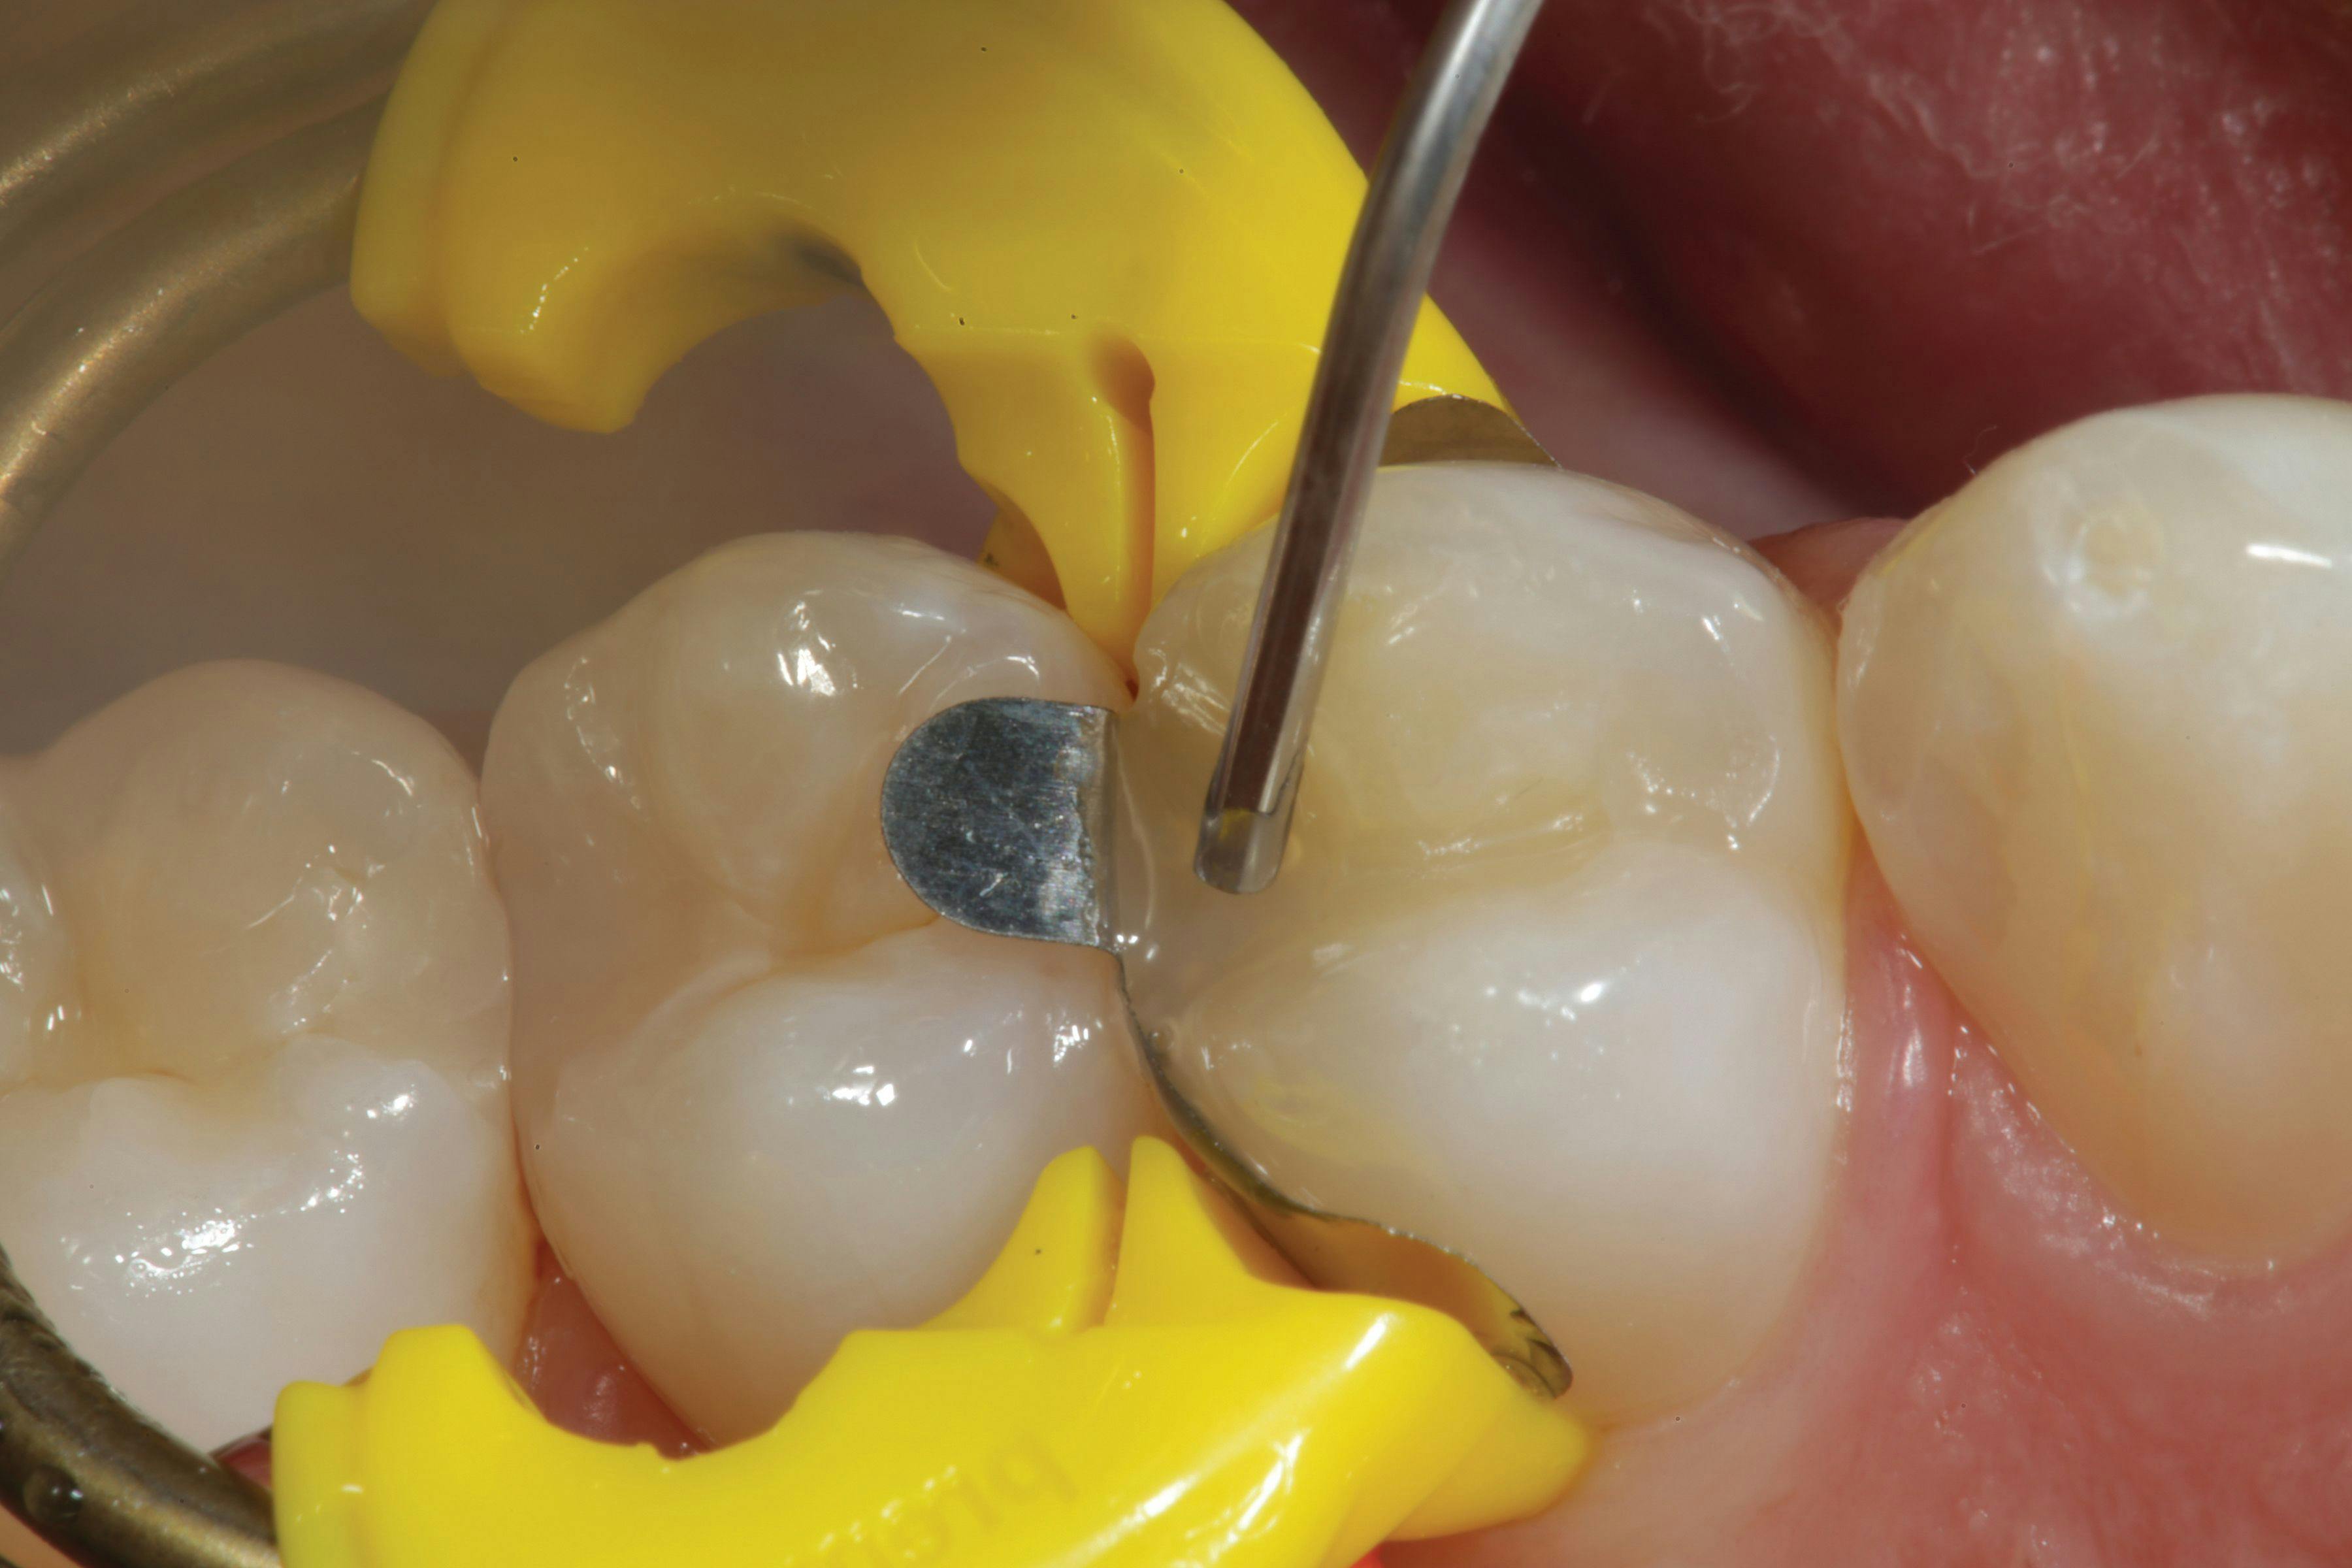 How to Bulk Fill Flowable Composite Restorations Without a Capping Layer